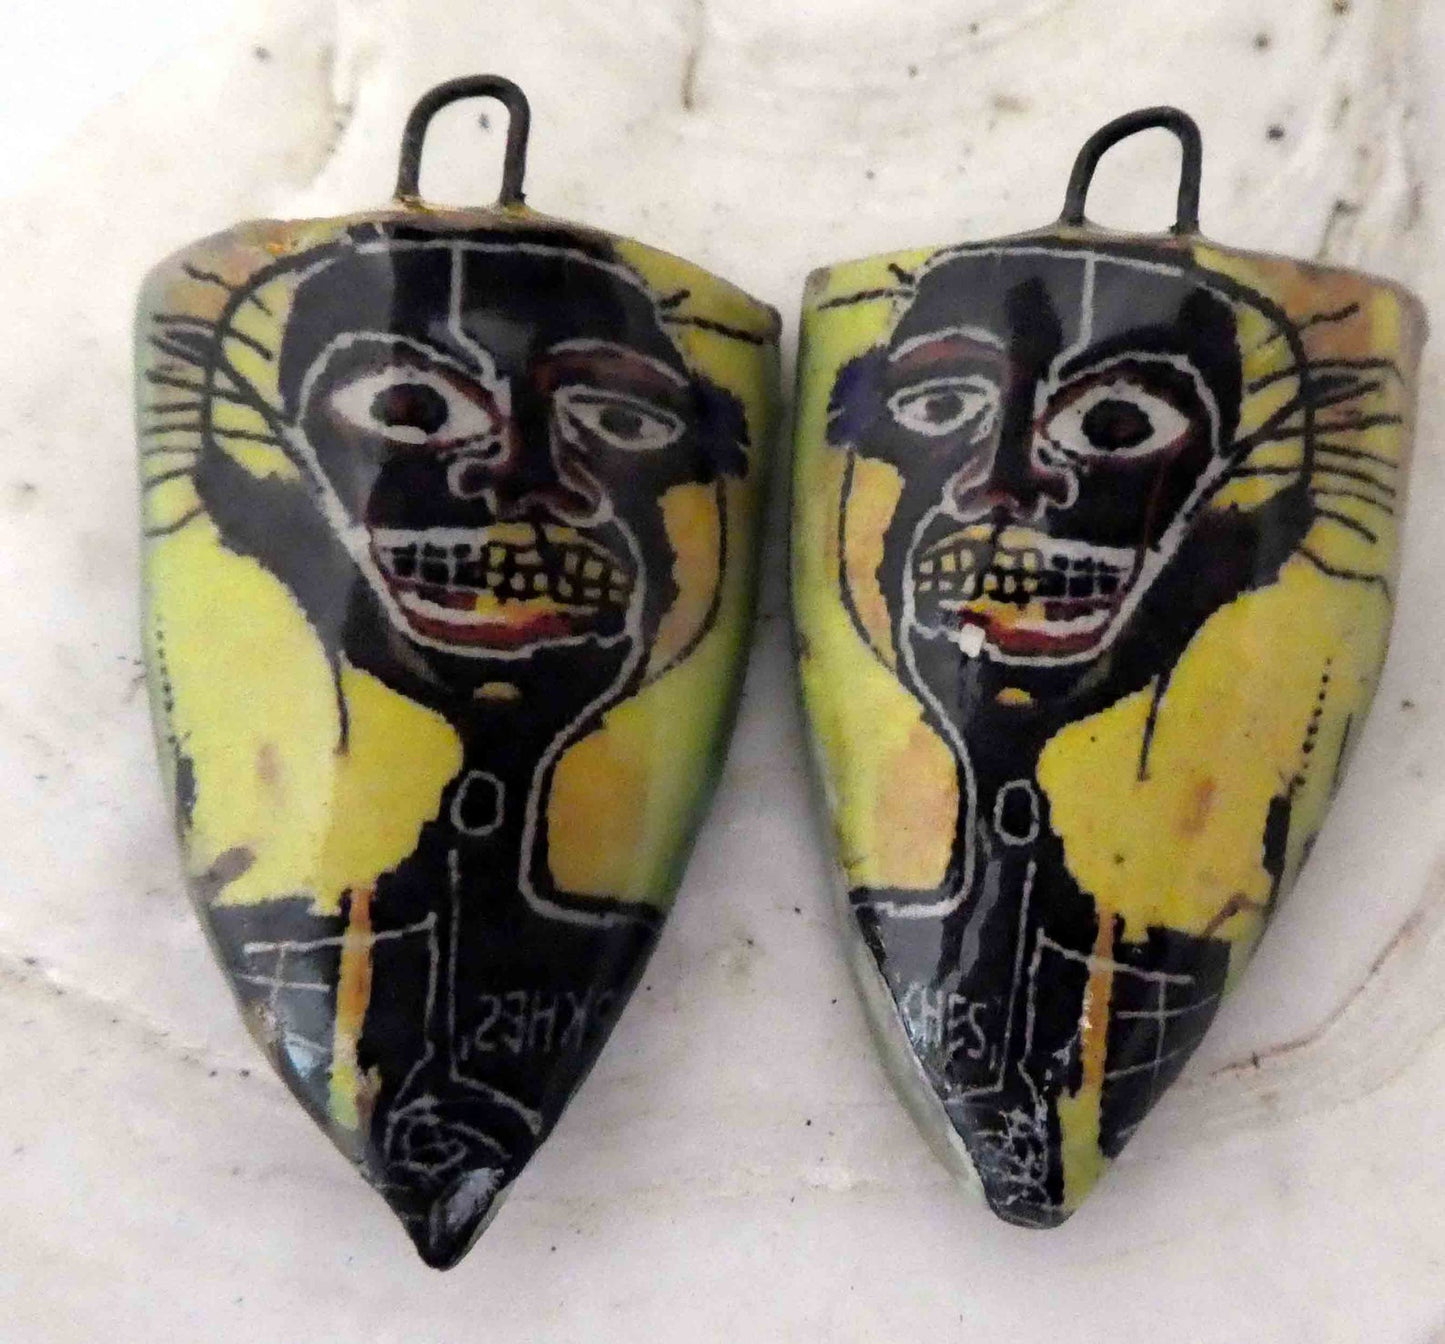 Ceramic Decal Basquiat Shield Earring Charms #2